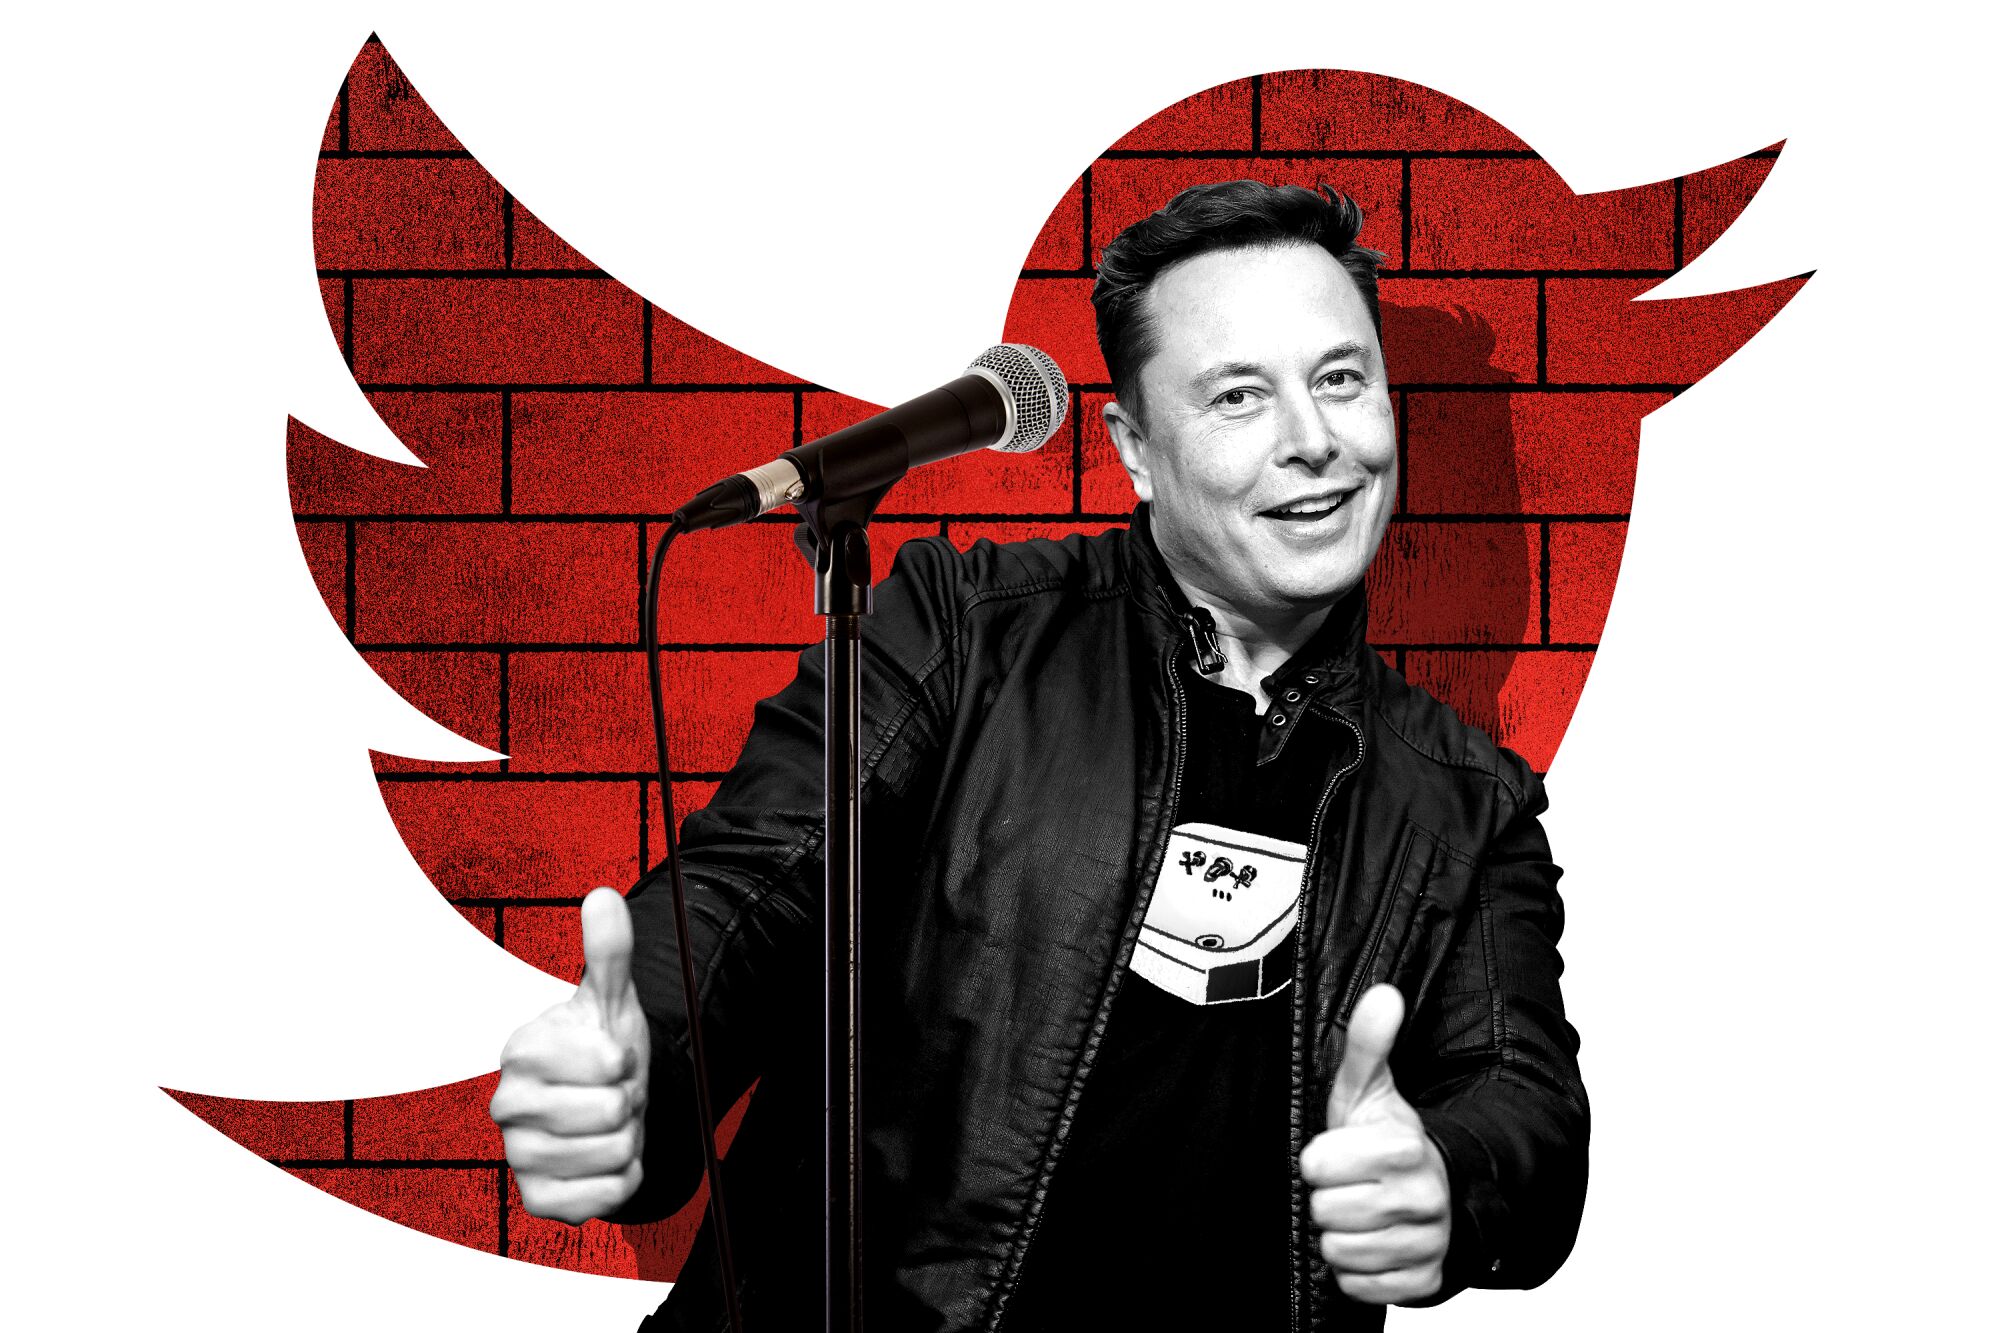 Photo illustration of Elon Musk doing stand-up comedy in front of a brick wall and twitter logo spotlight